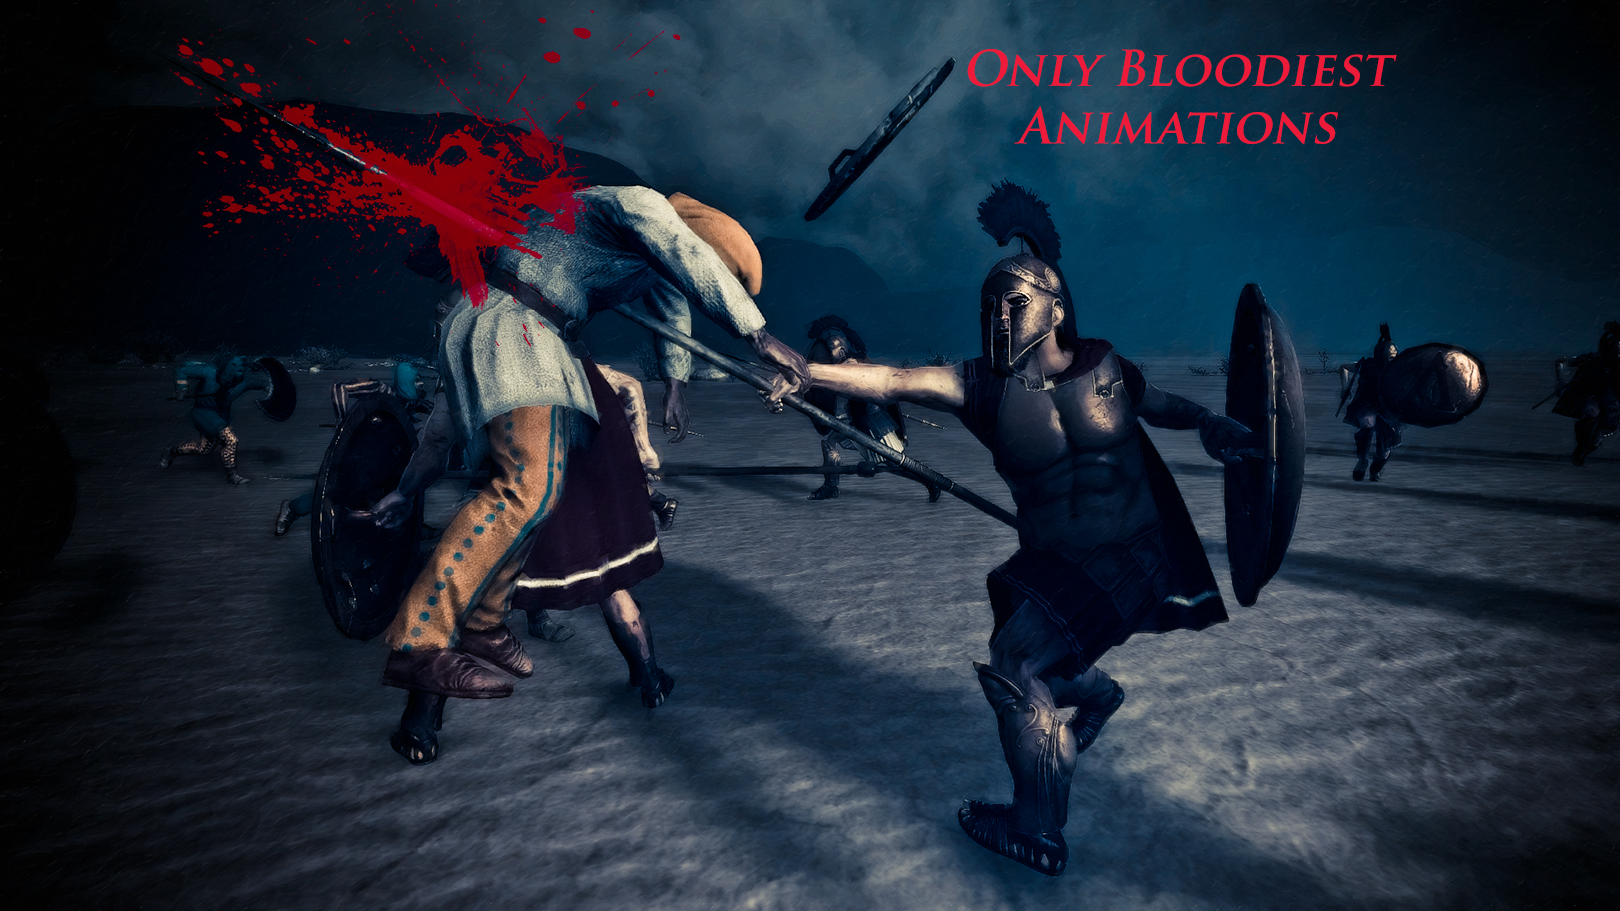 More Bloody Animation (Animations Mod)